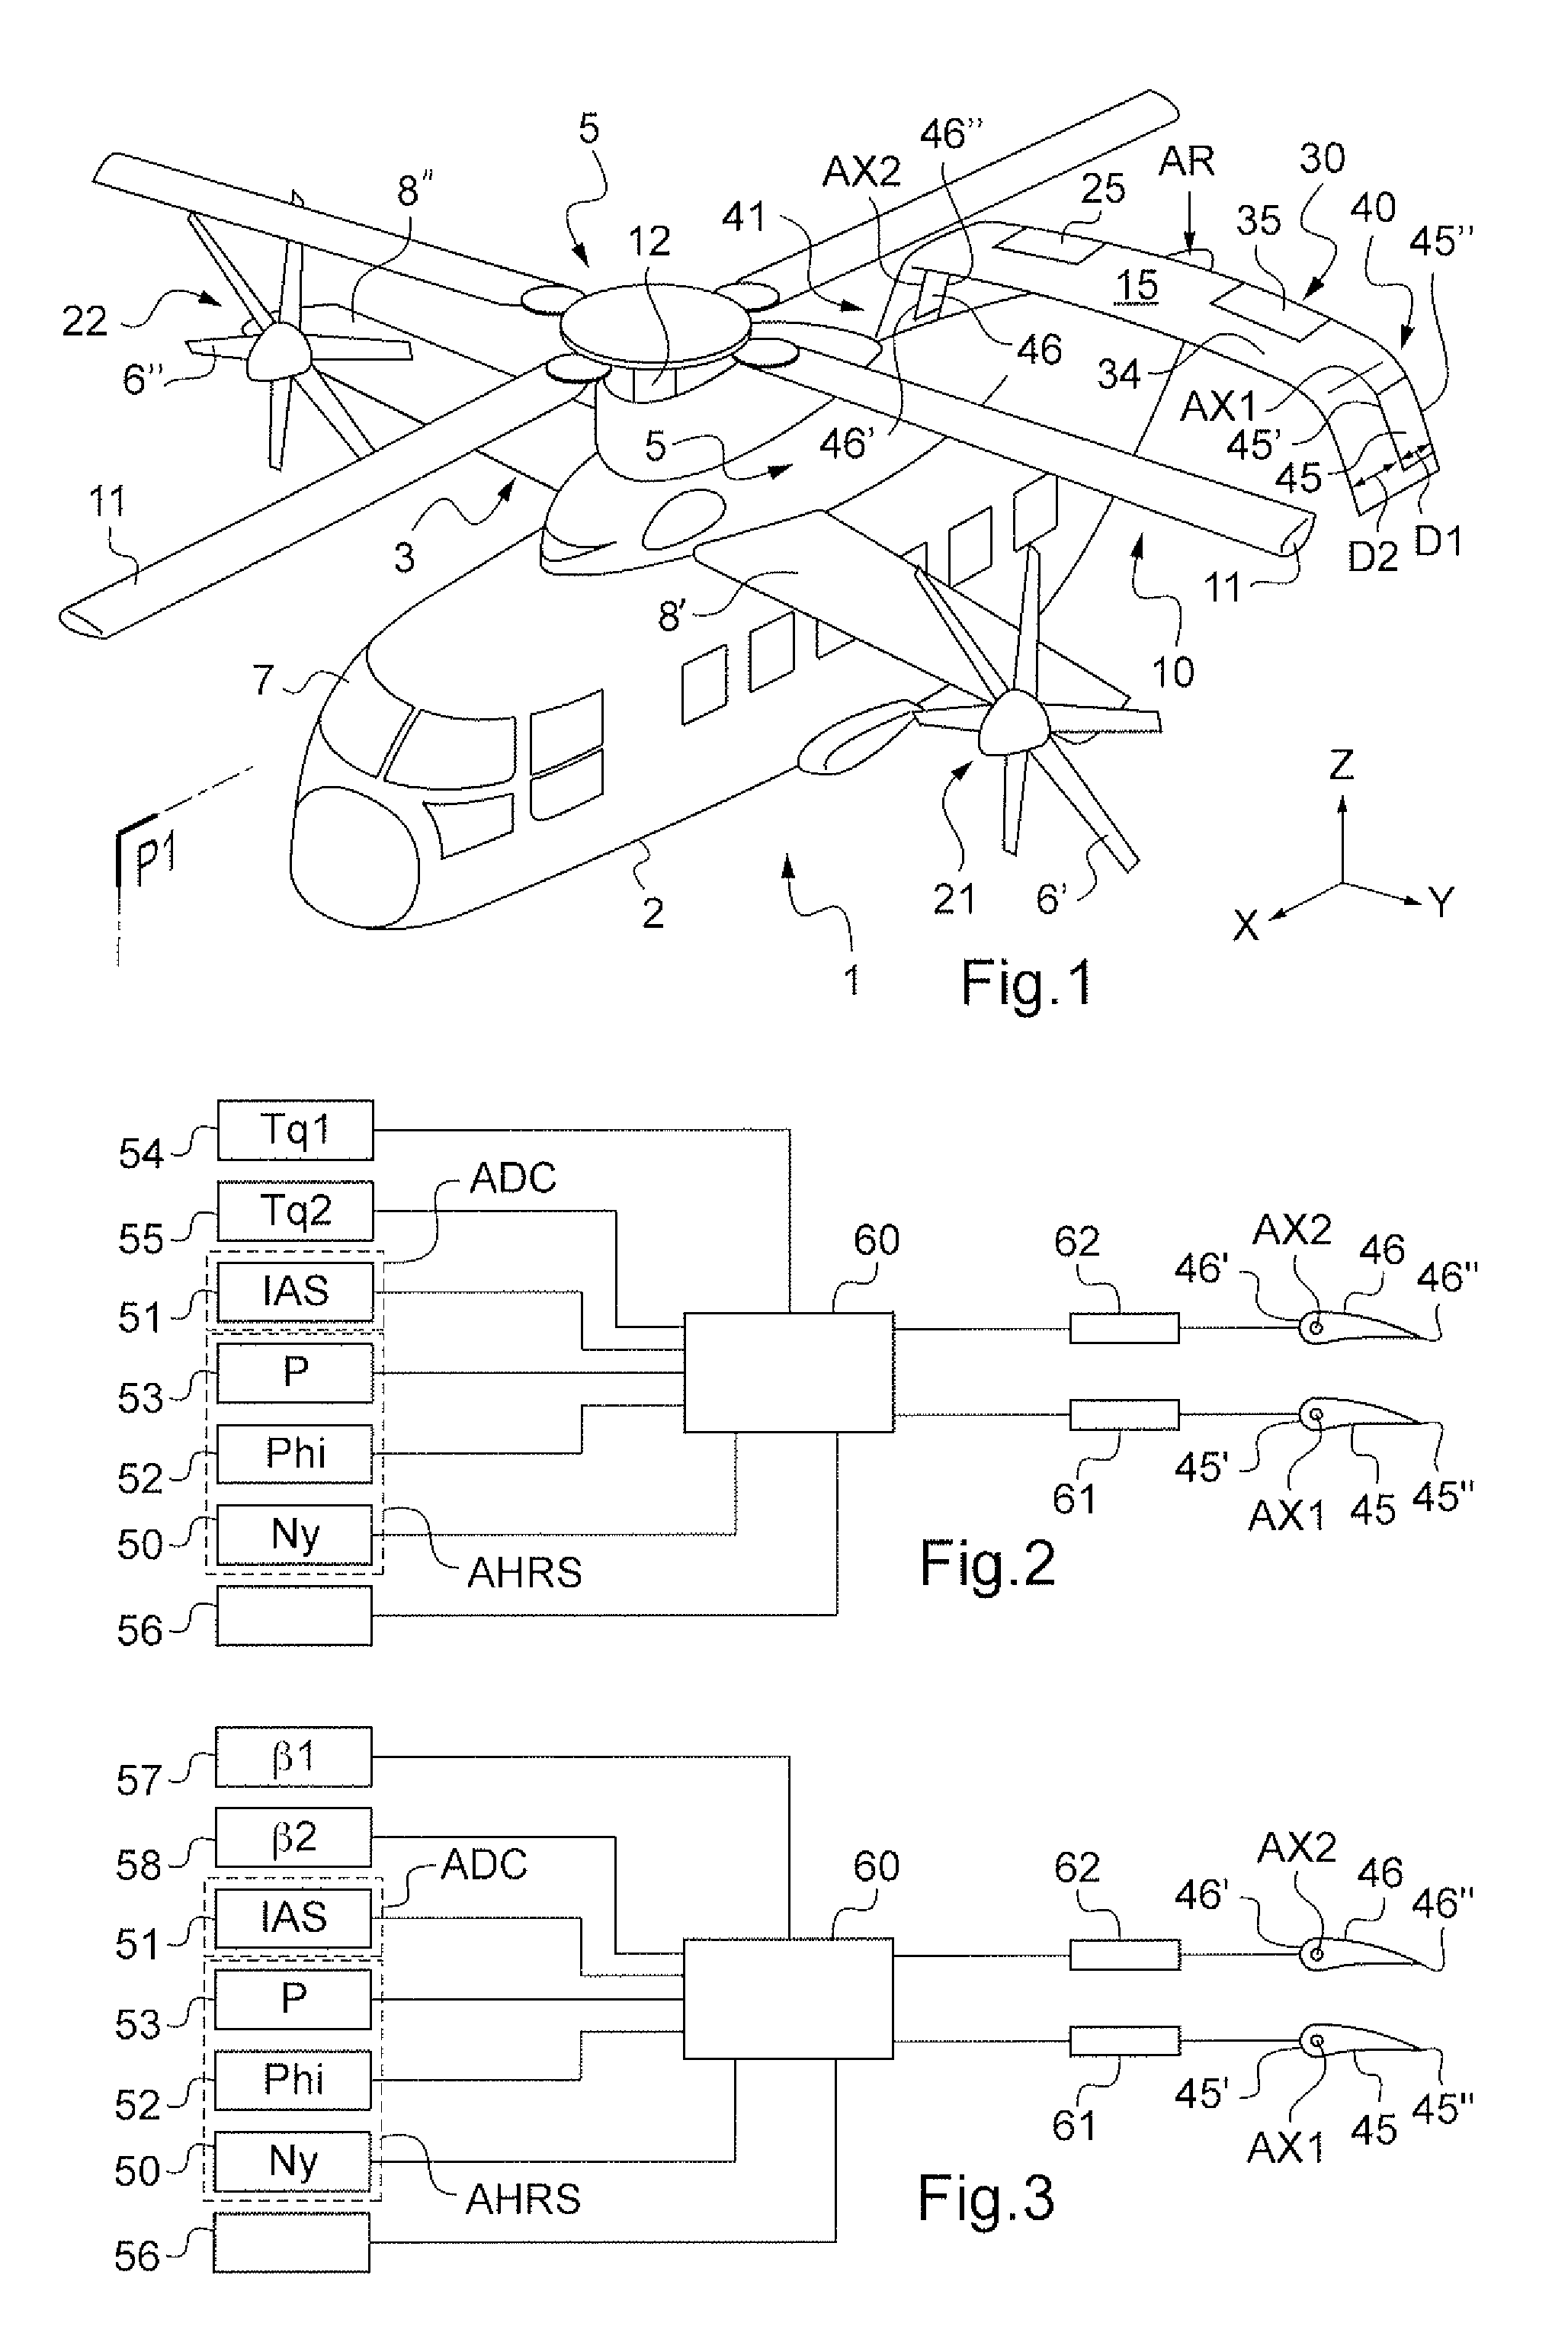 Method and a device for optimizing the operation of propulsive propellers disposed on either side of a rotorcraft fuselage